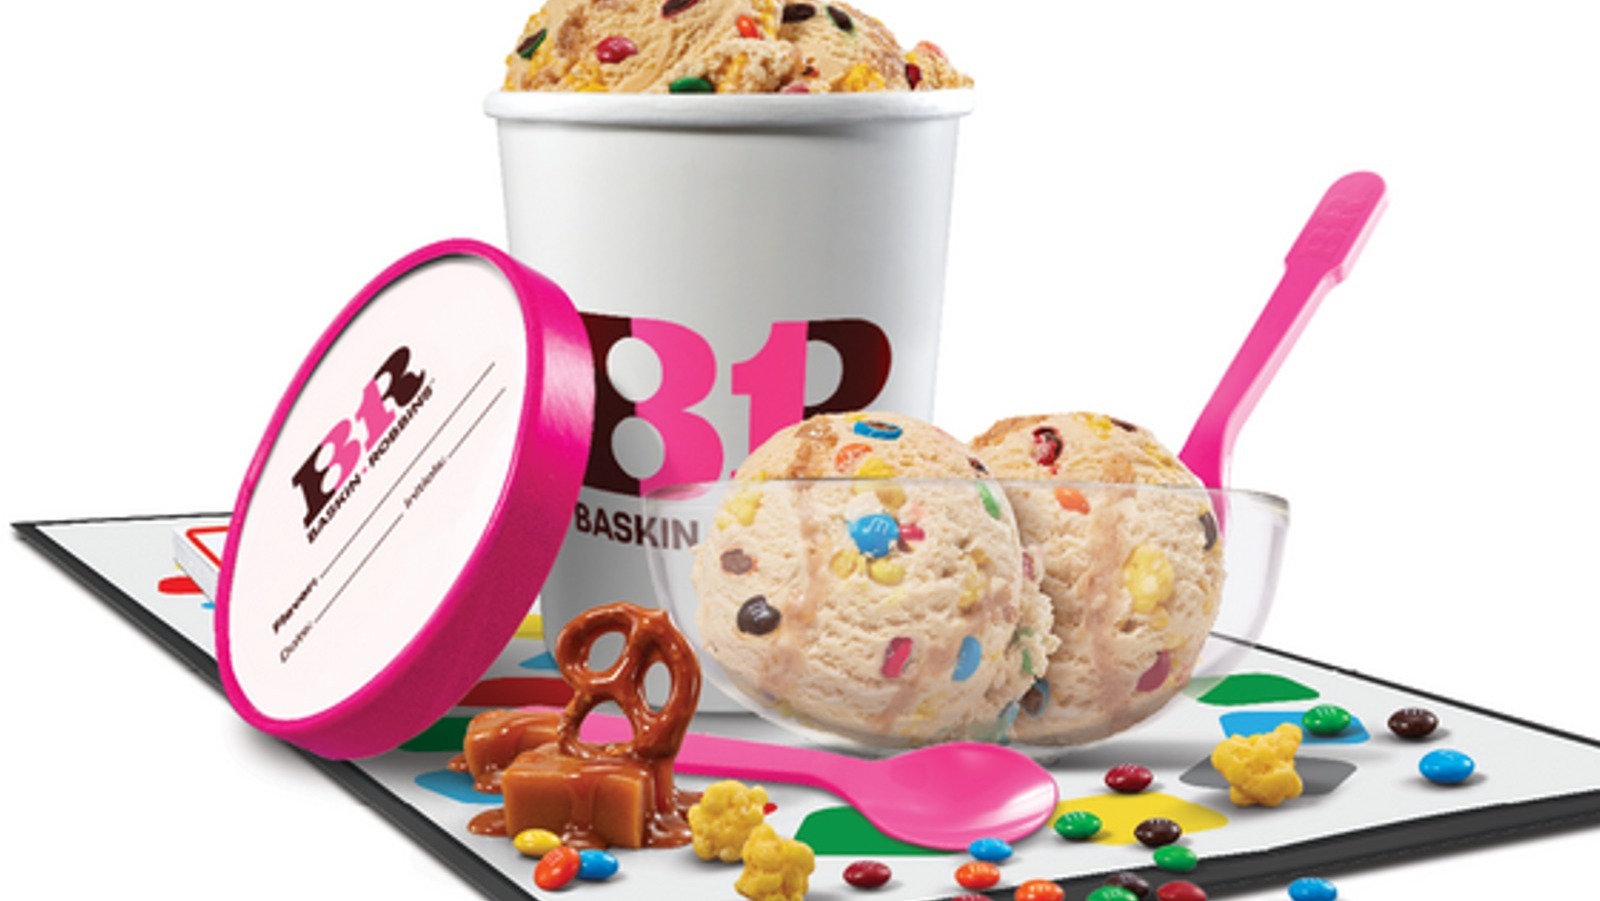 Baskin-Robbins’ August Ice Cream Flavor Is A Snack Food Explosion – Mashed